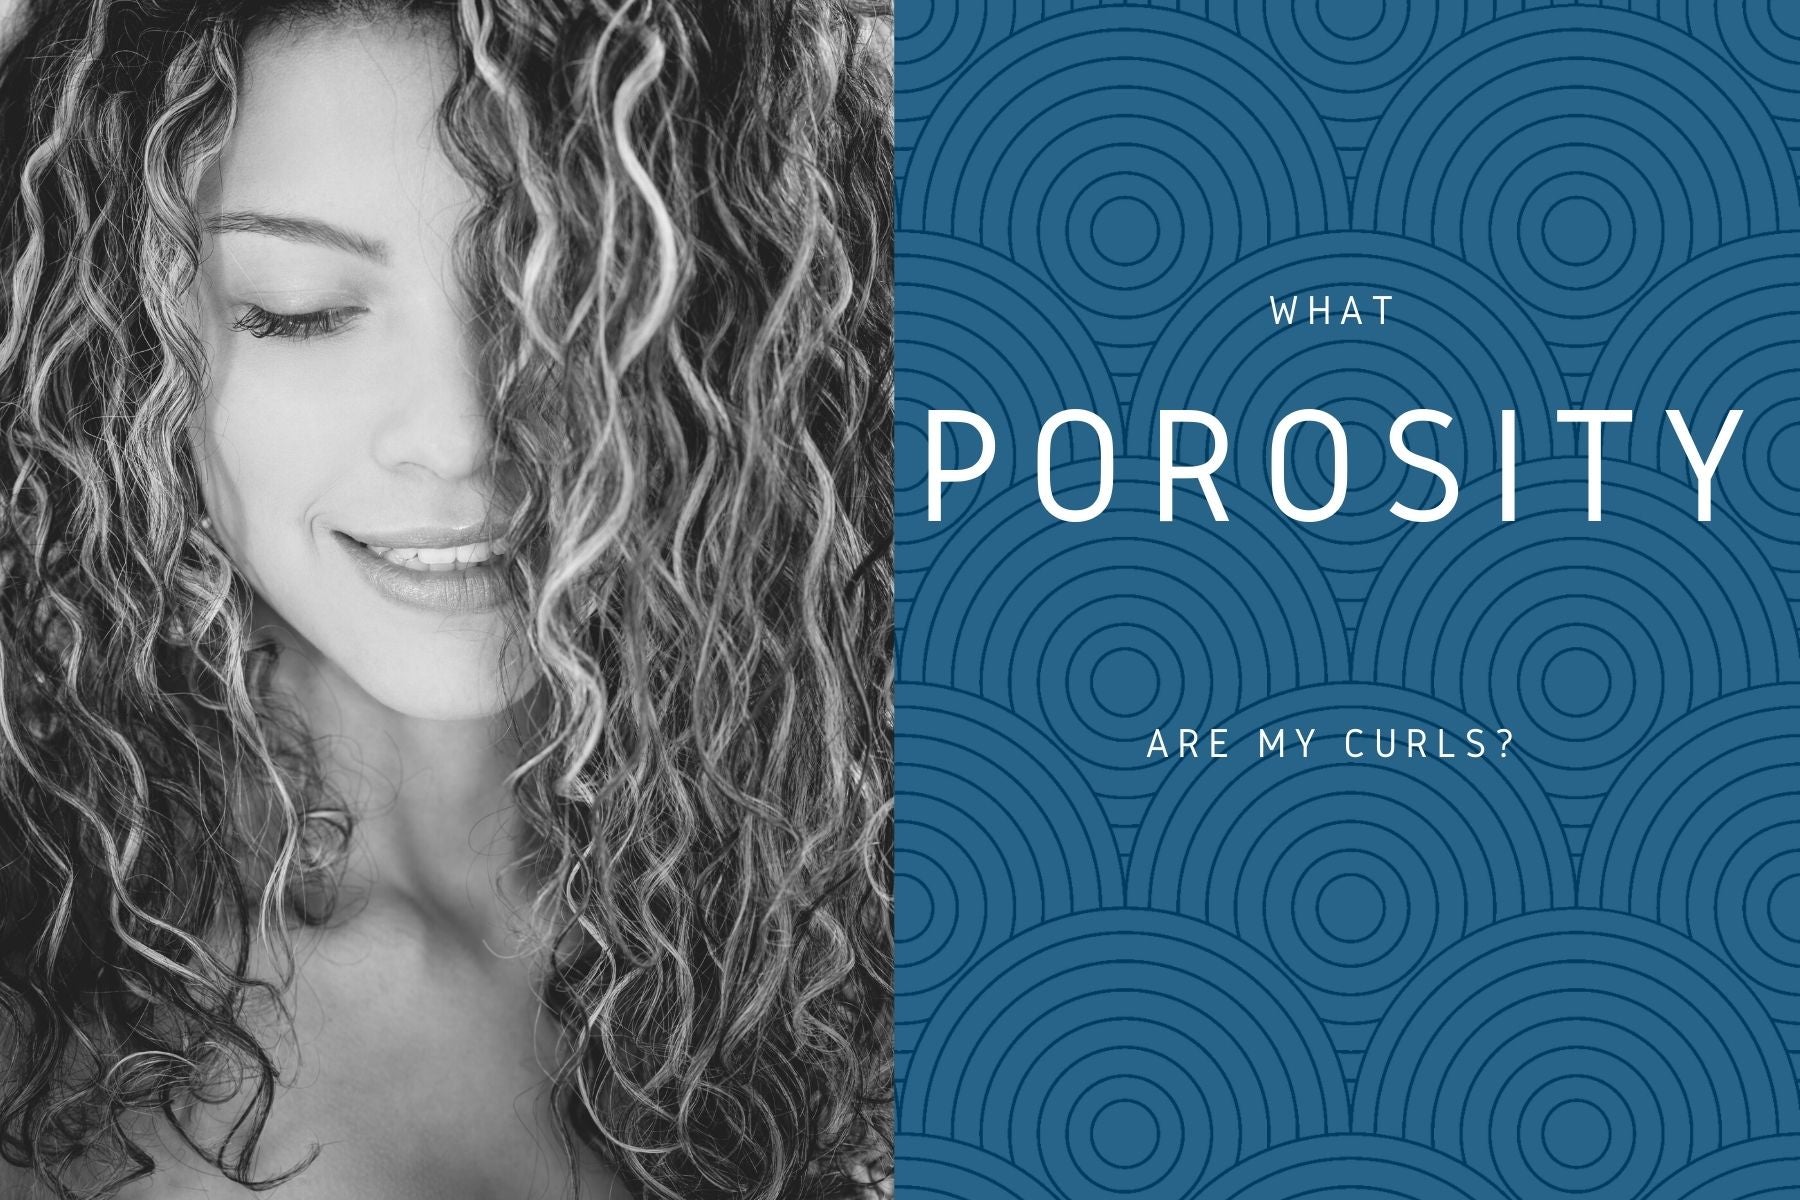 What Porosity Are My Curls?